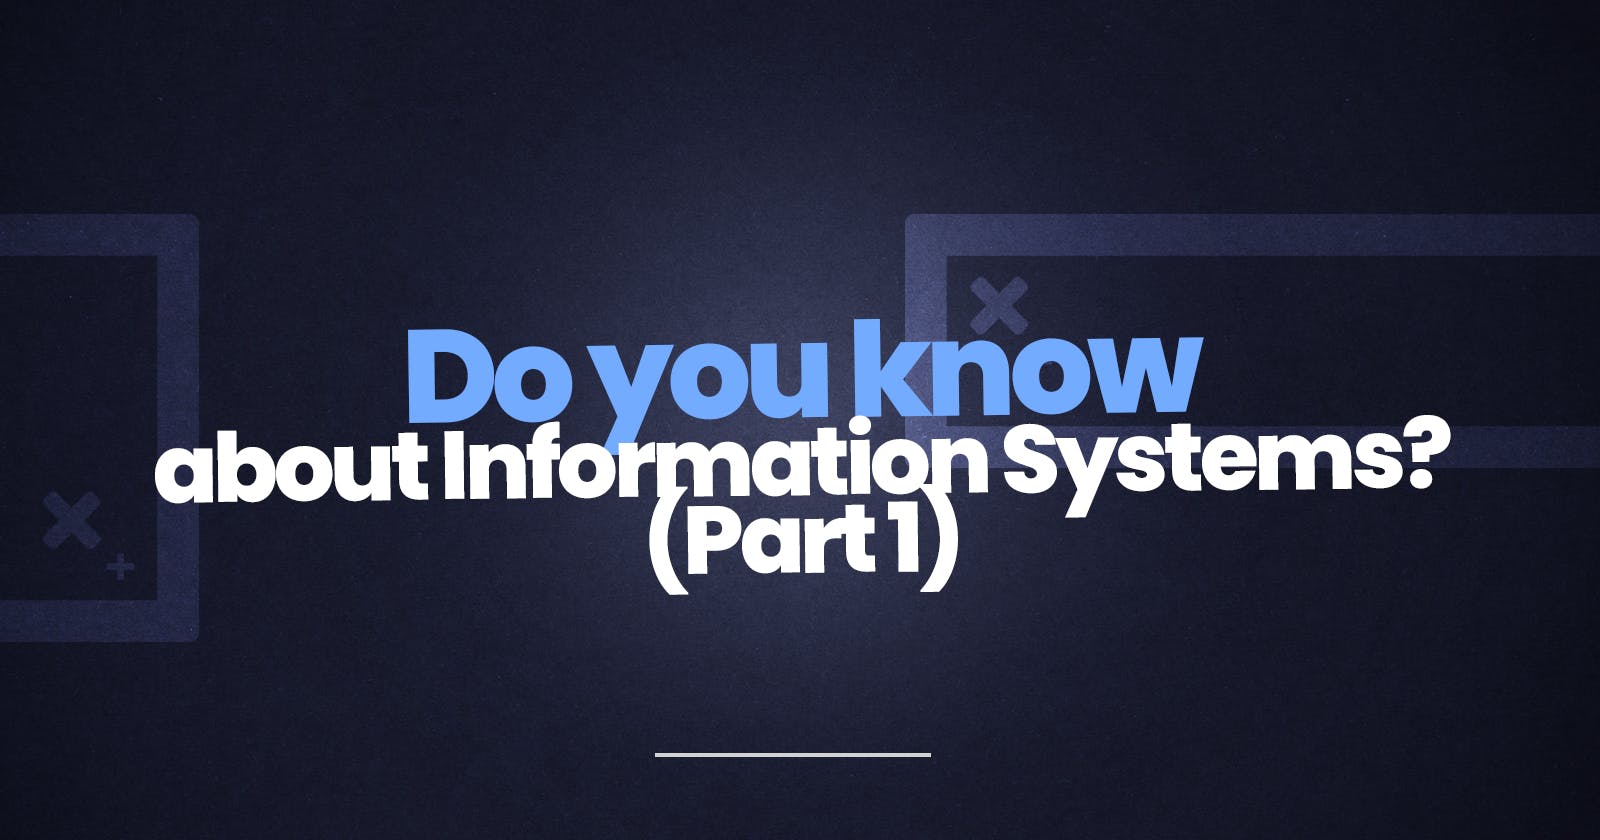 Do you know about Information Systems?